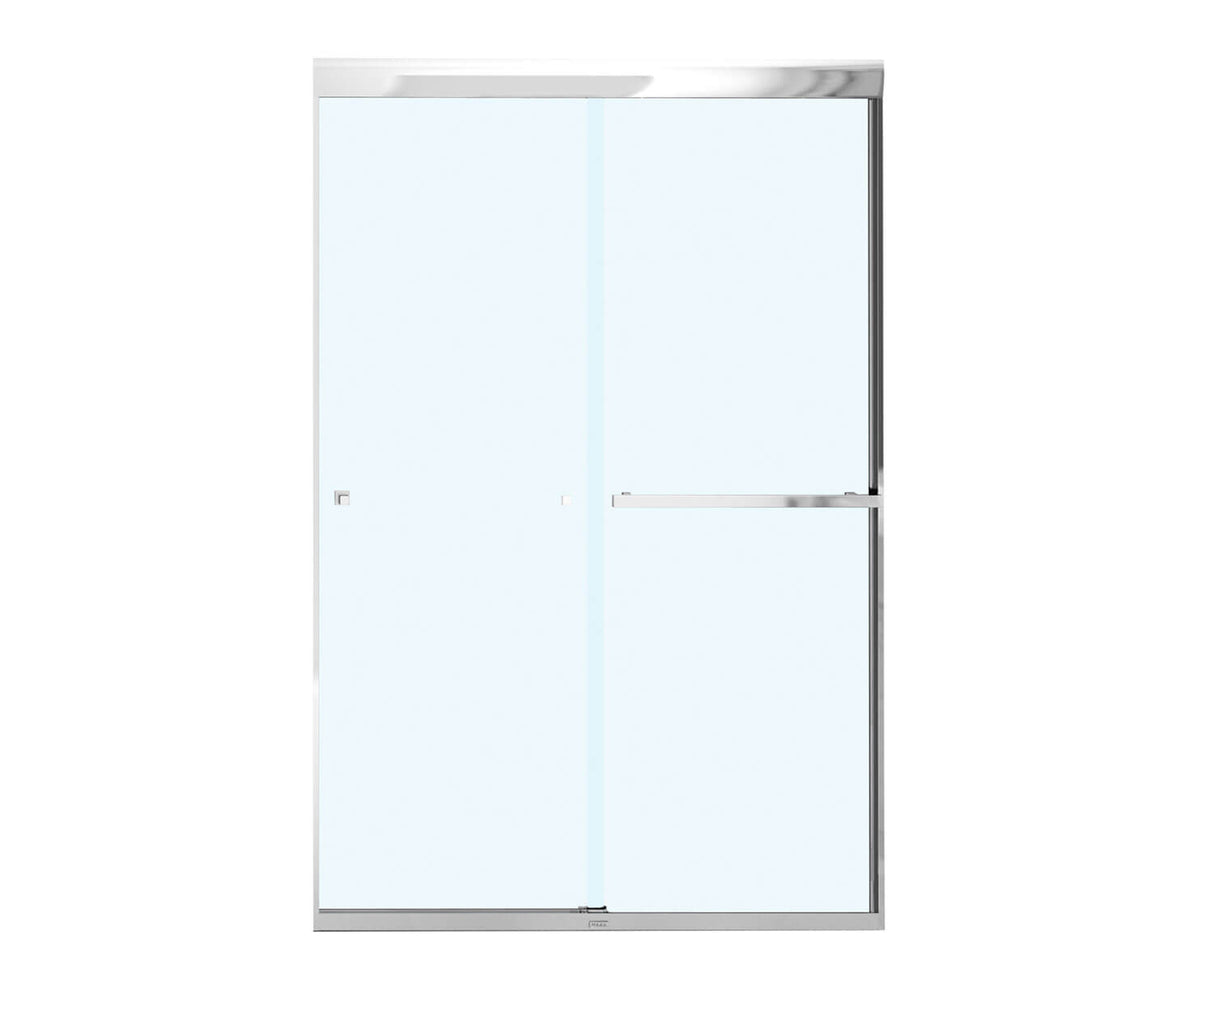 MAAX 135671-900-084-000 Aura 43-47 x 71 in. 8 mm Bypass Shower Door for Alcove Installation with Clear glass in Chrome